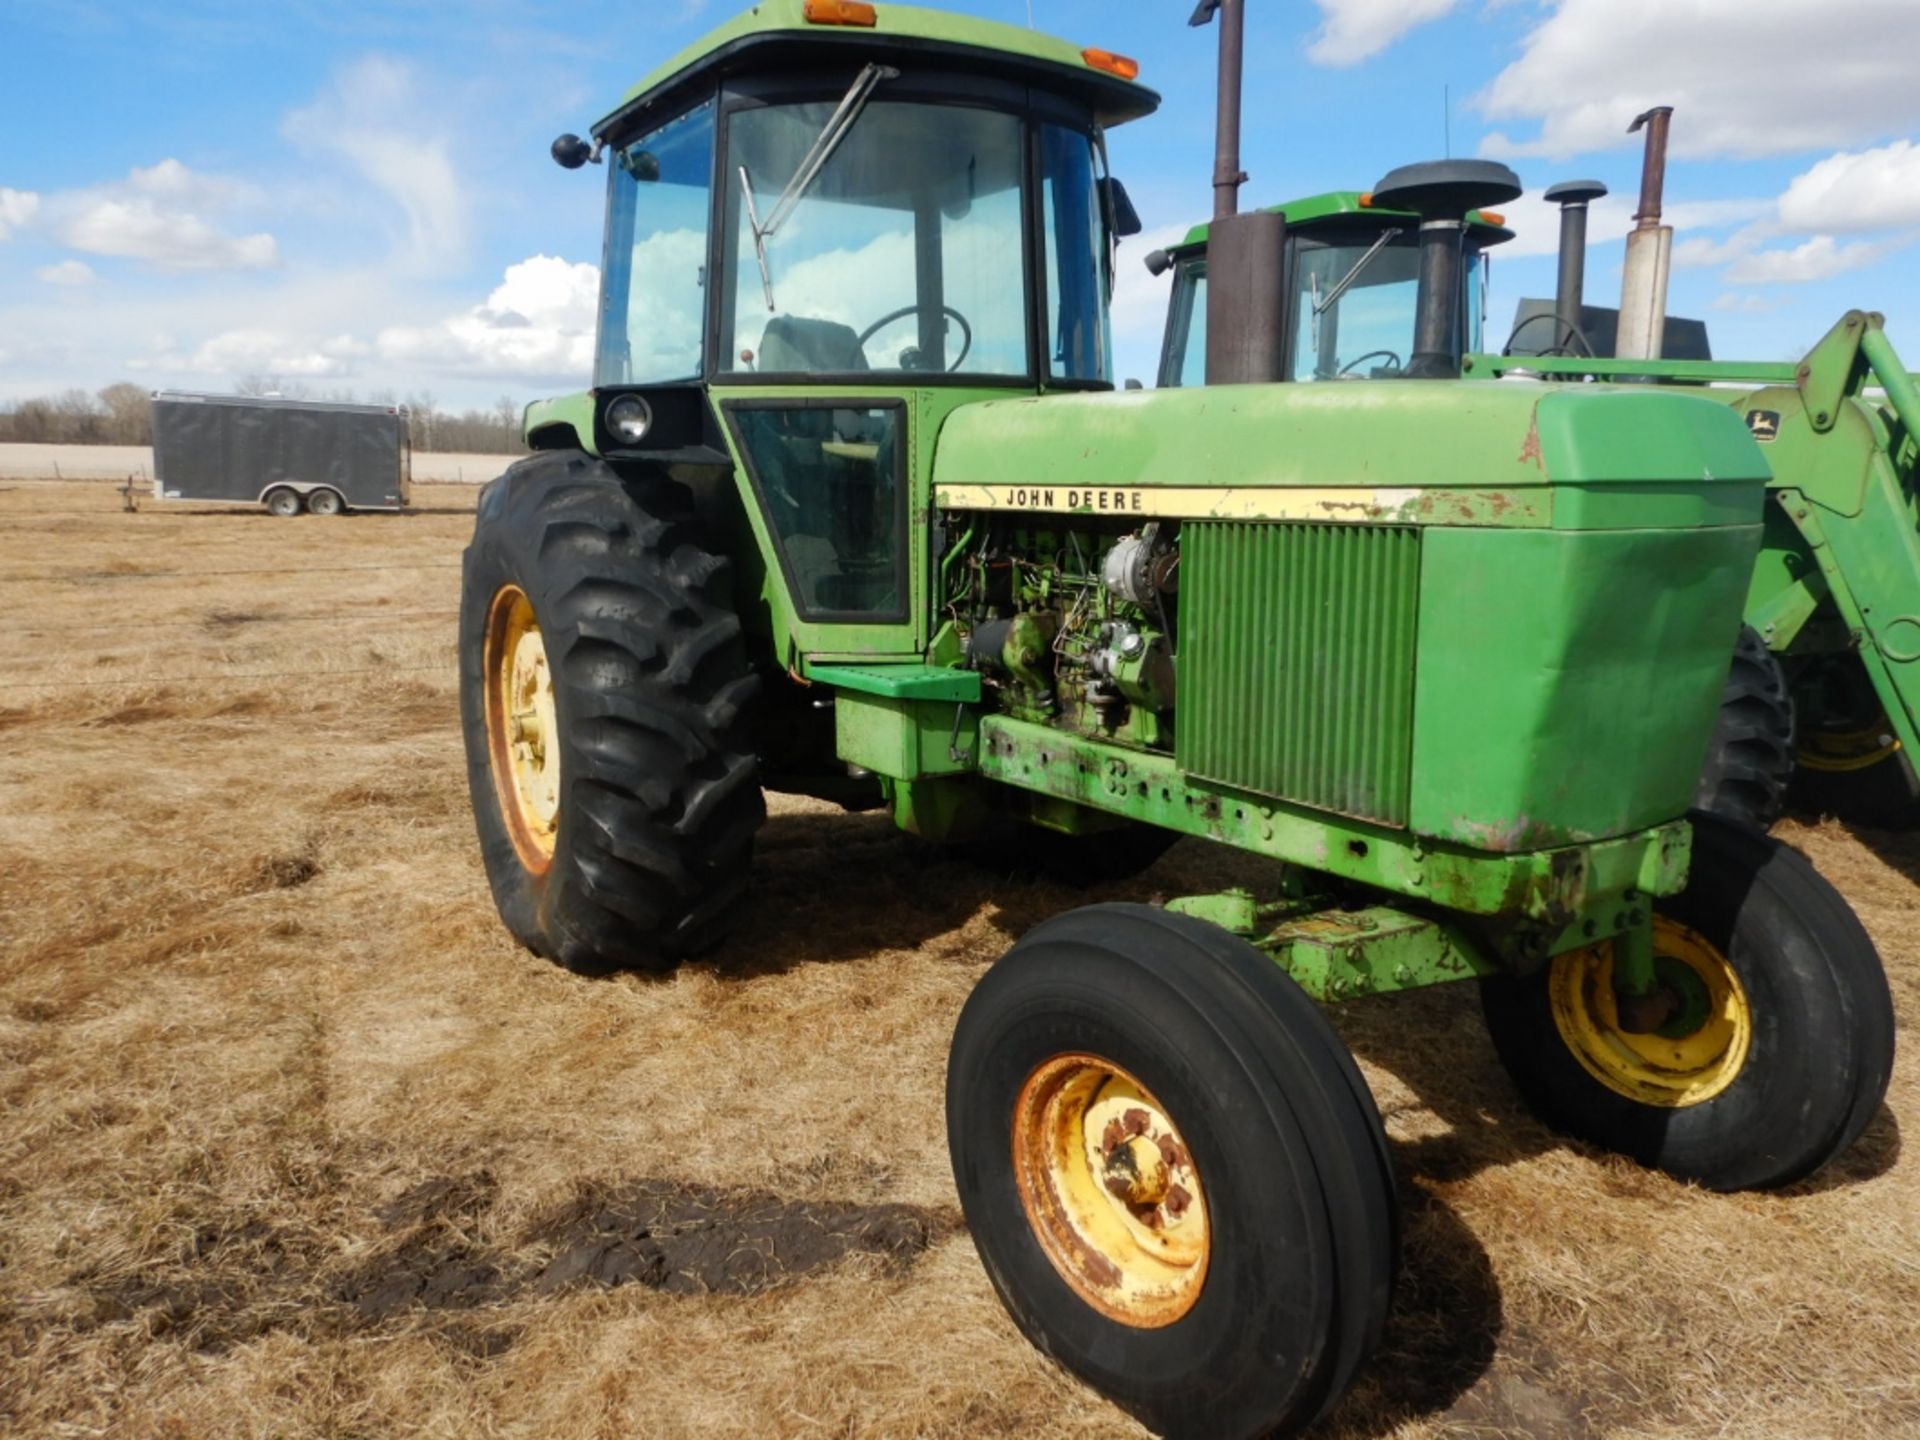 JOHN DEERE 4230 TRACTOR W/ 3-HYD OULETS, 20.8X34 RUBBER, 540/1000 PTO, S/N 4230H019938R - Image 7 of 19